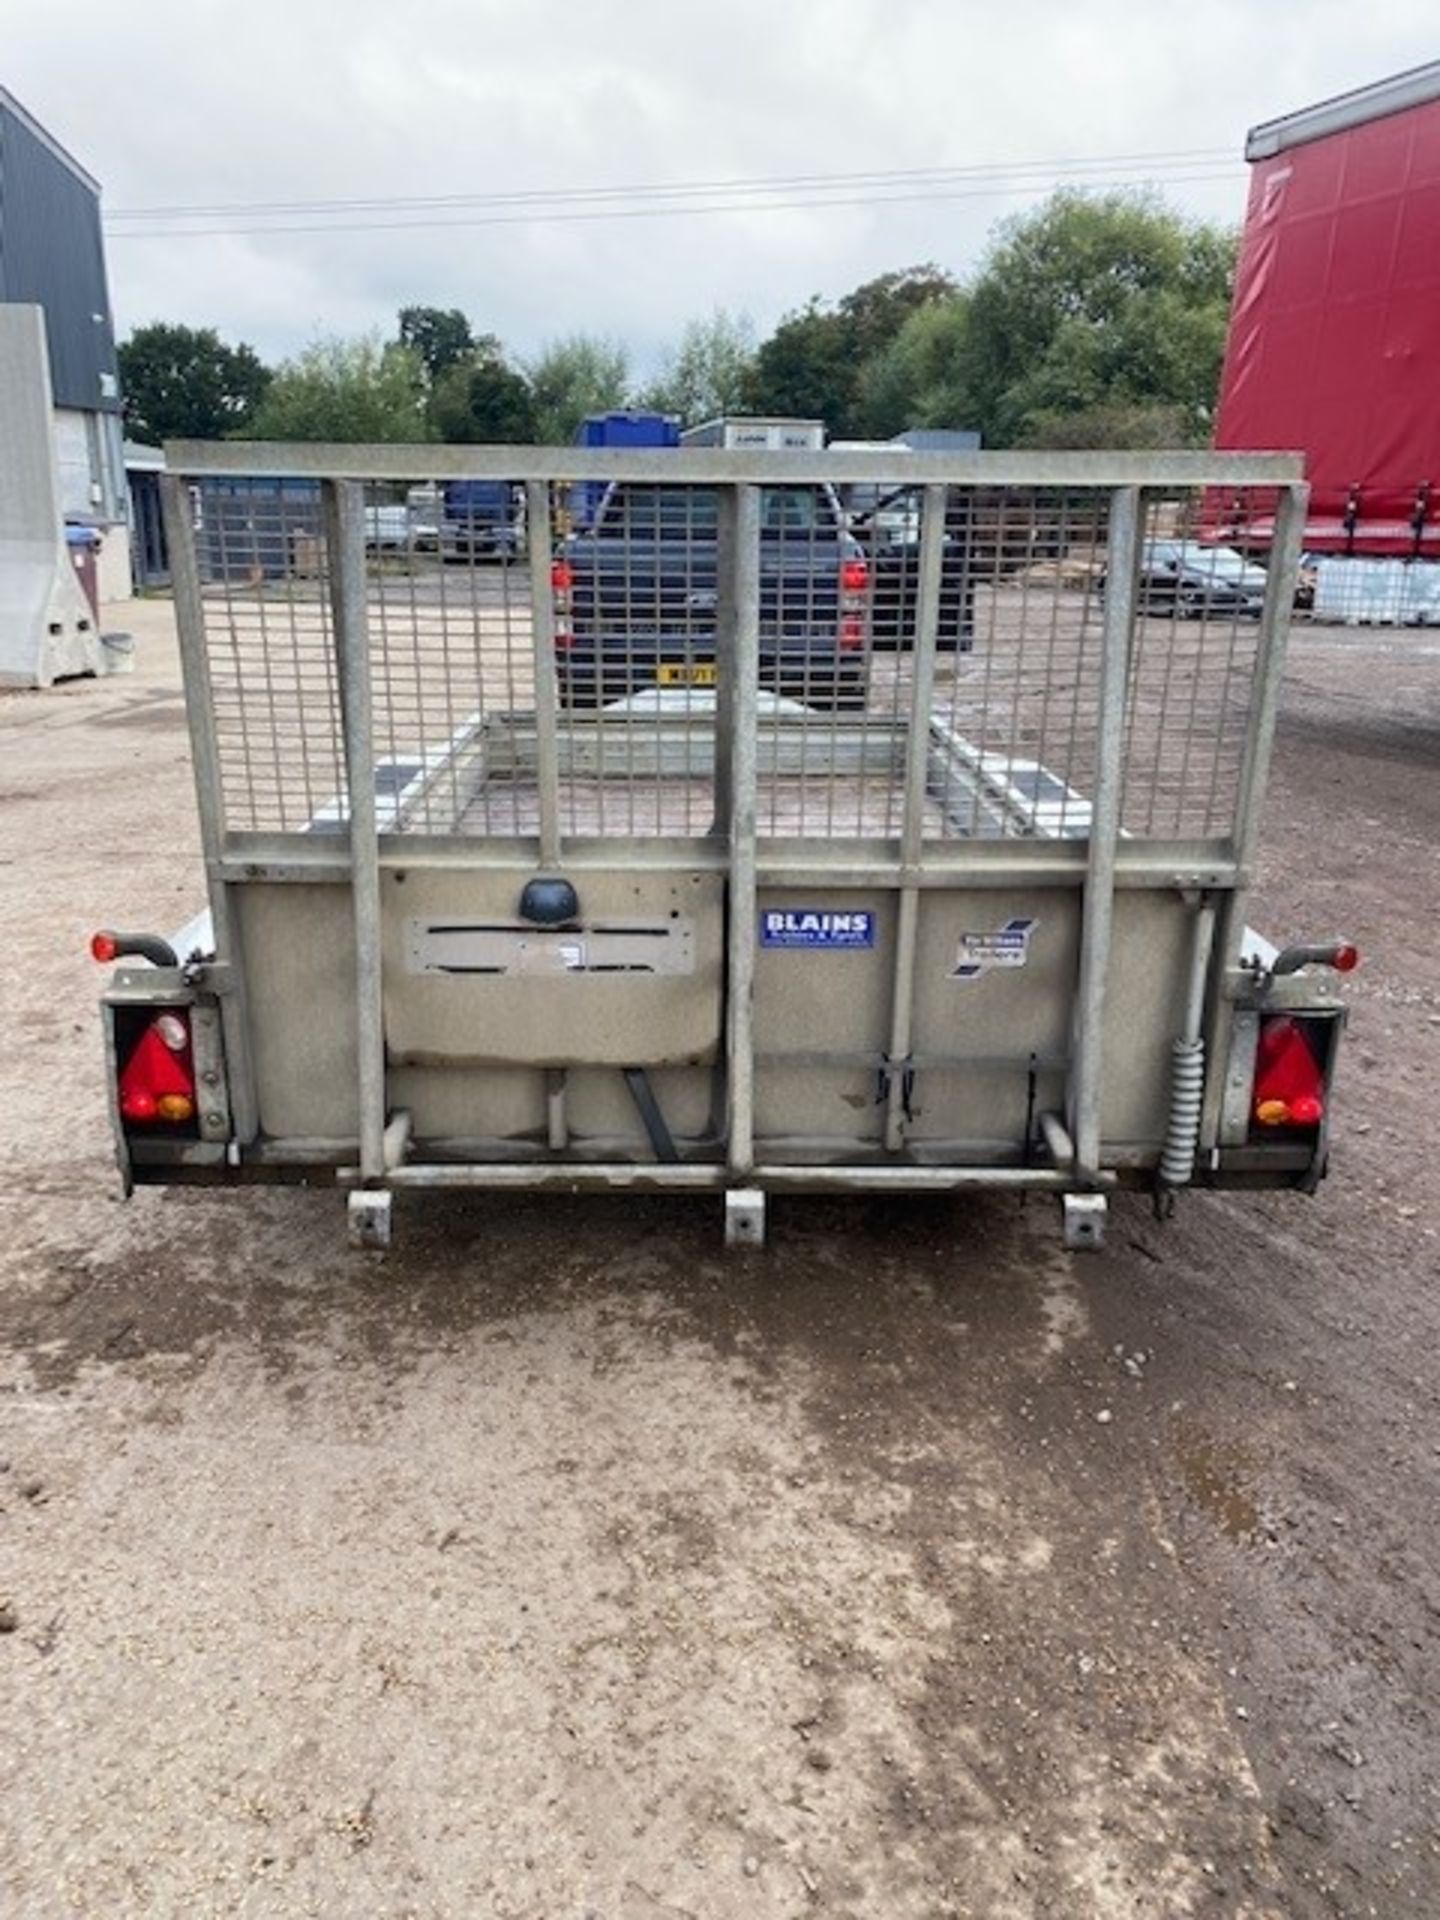 Ifor Williams 12 x 6 Plant Trailer, One Owner From New, Ball Hitch, Good Trailer All Round*PLUS VAT* - Image 4 of 10